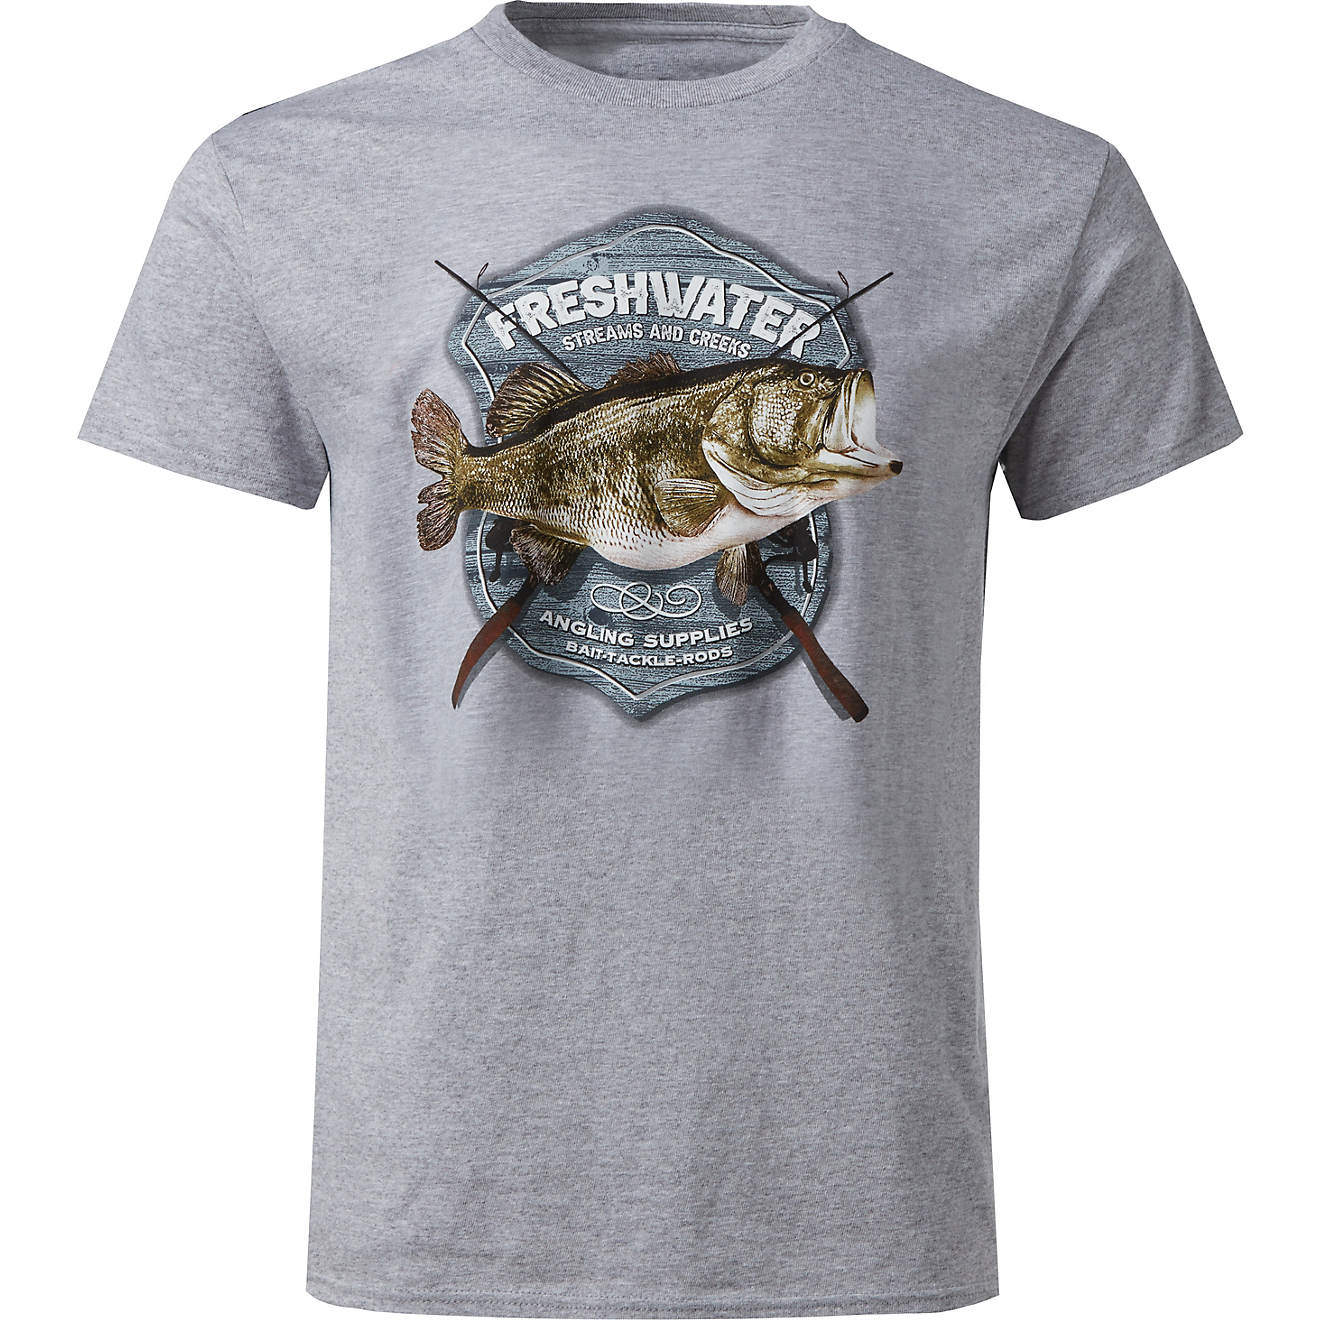 Academy Sports + Outdoors Men's Fishing Angling T-shirt | Academy